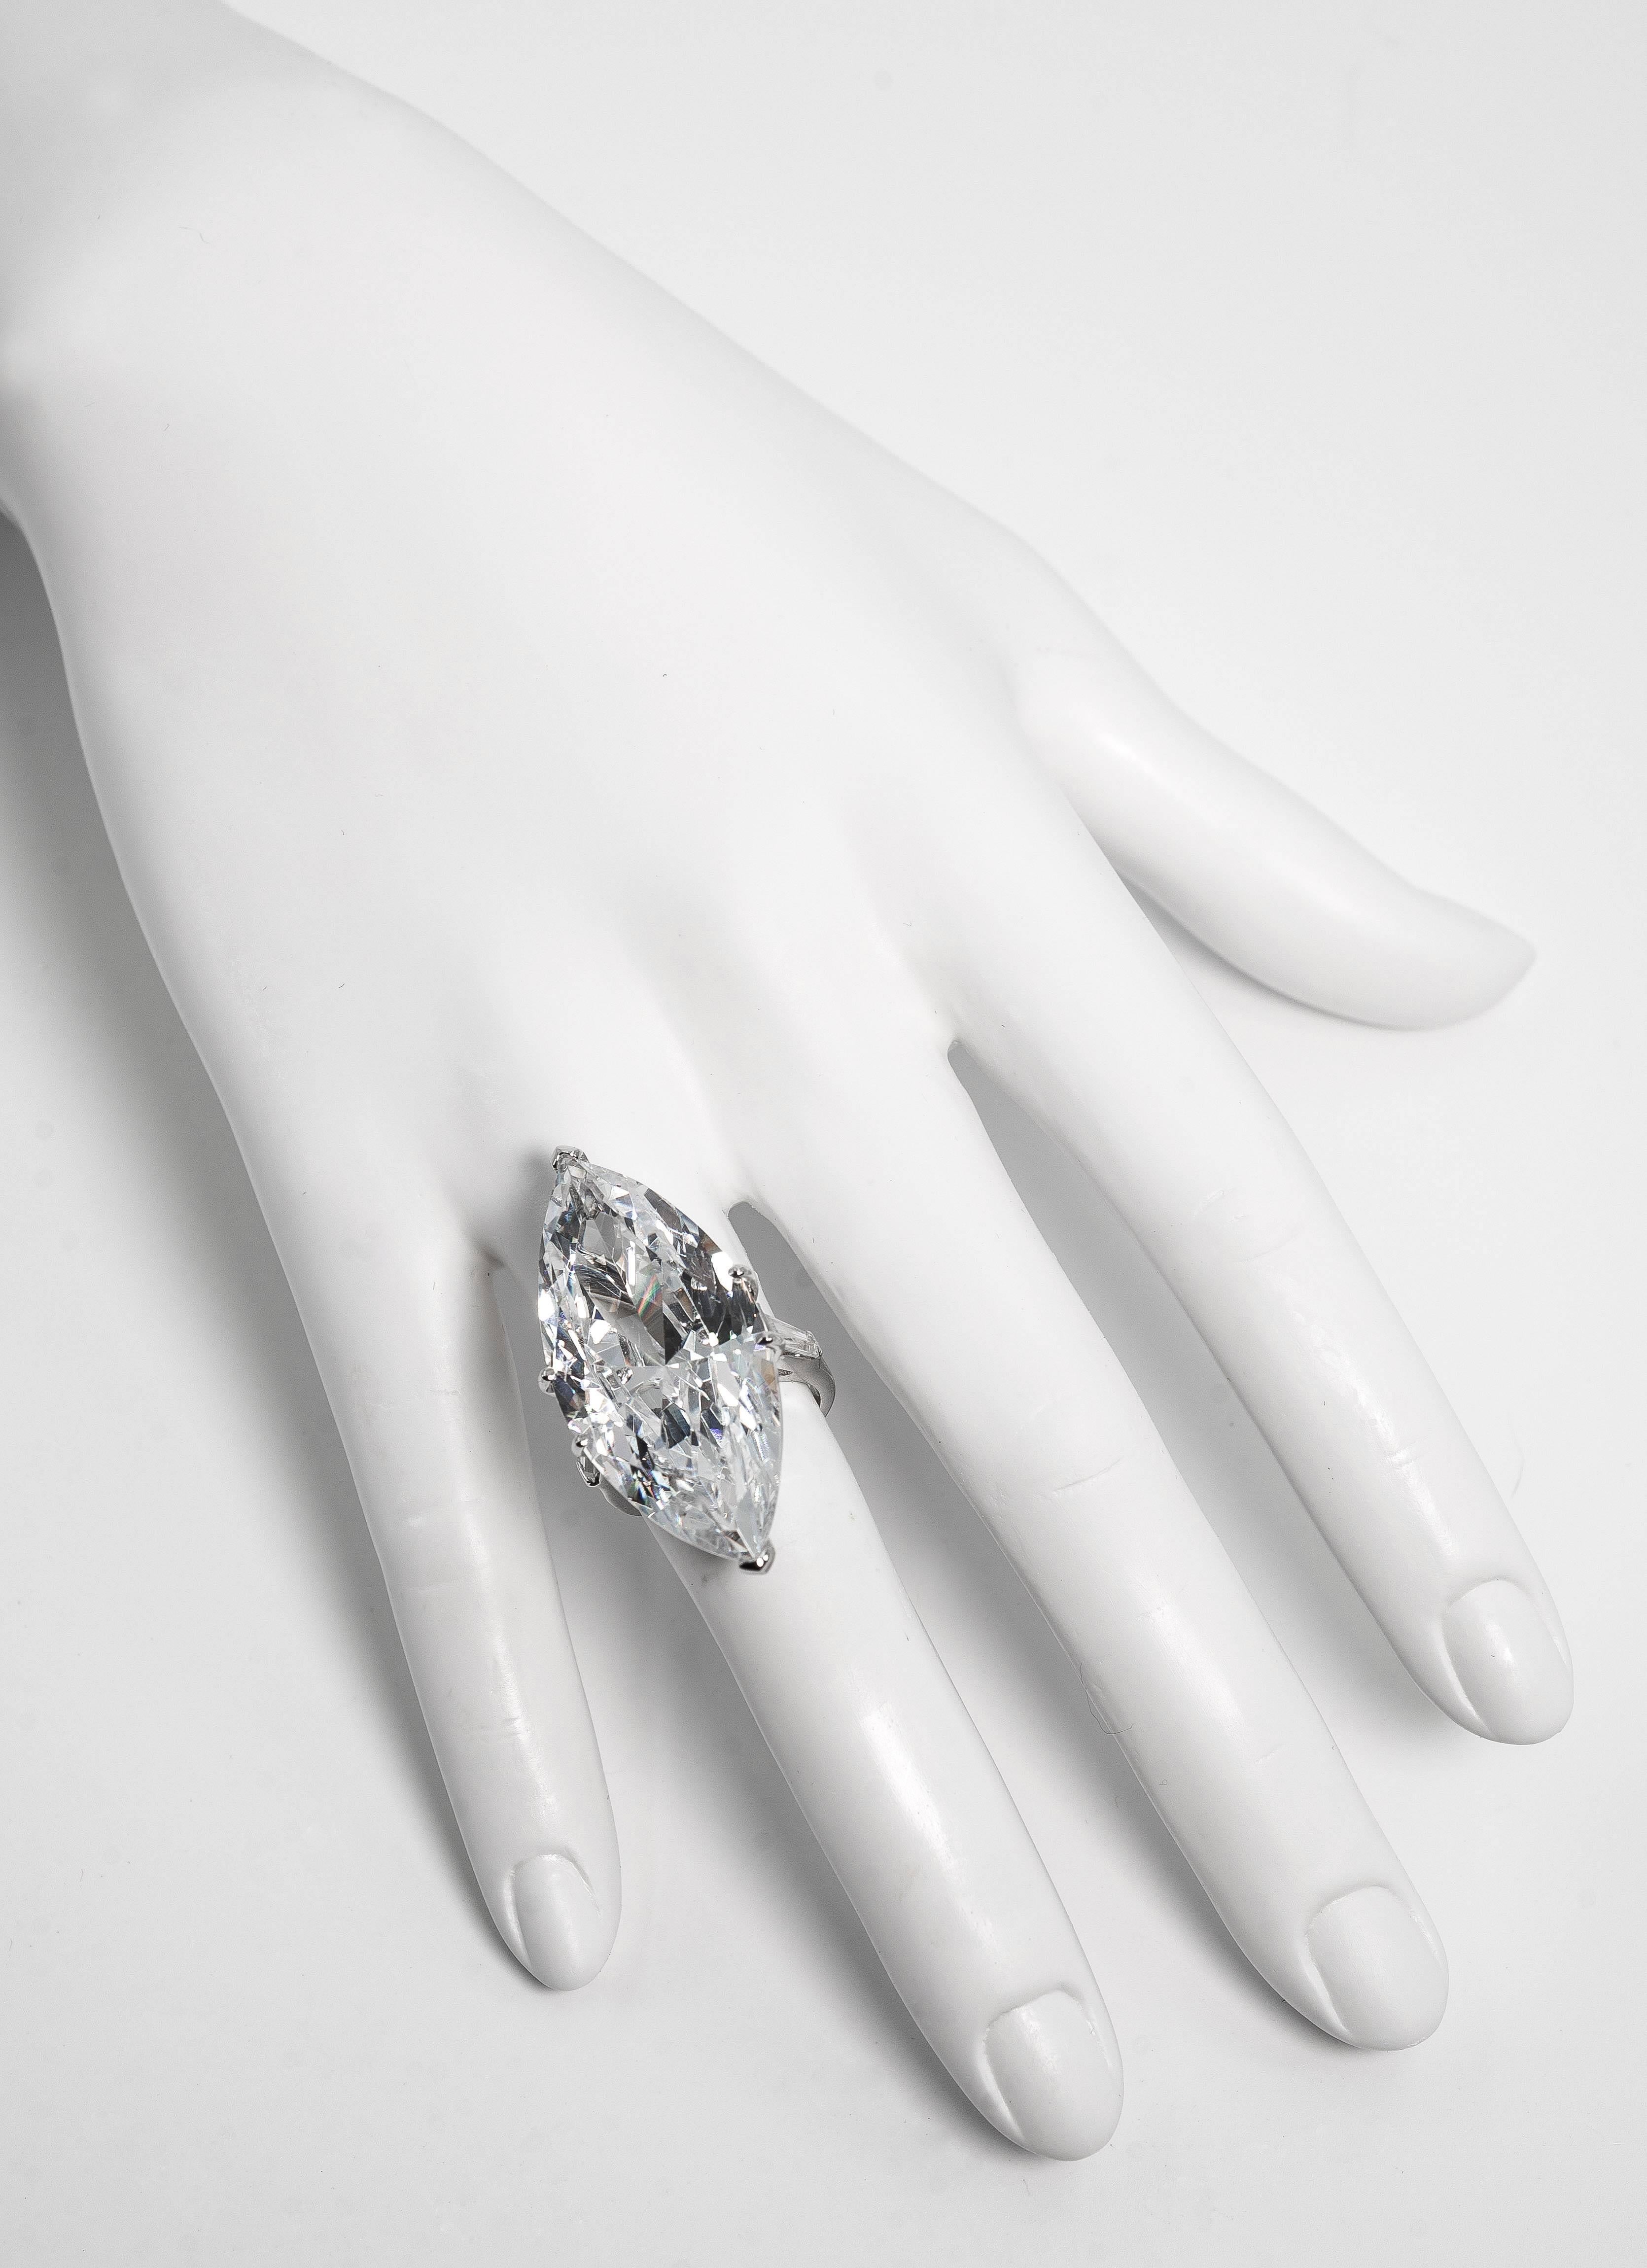  Jackie O' 40 Carat Marquise D Color Cubic Zirconia Diamond Ring Copy 
A Fabulous Fake. One for sale here, one sold at Sotheby's by Daniele Steele that had been bought at Bergdorf's in the 1990s. A copy of The Real One given to Jackie Onassis by